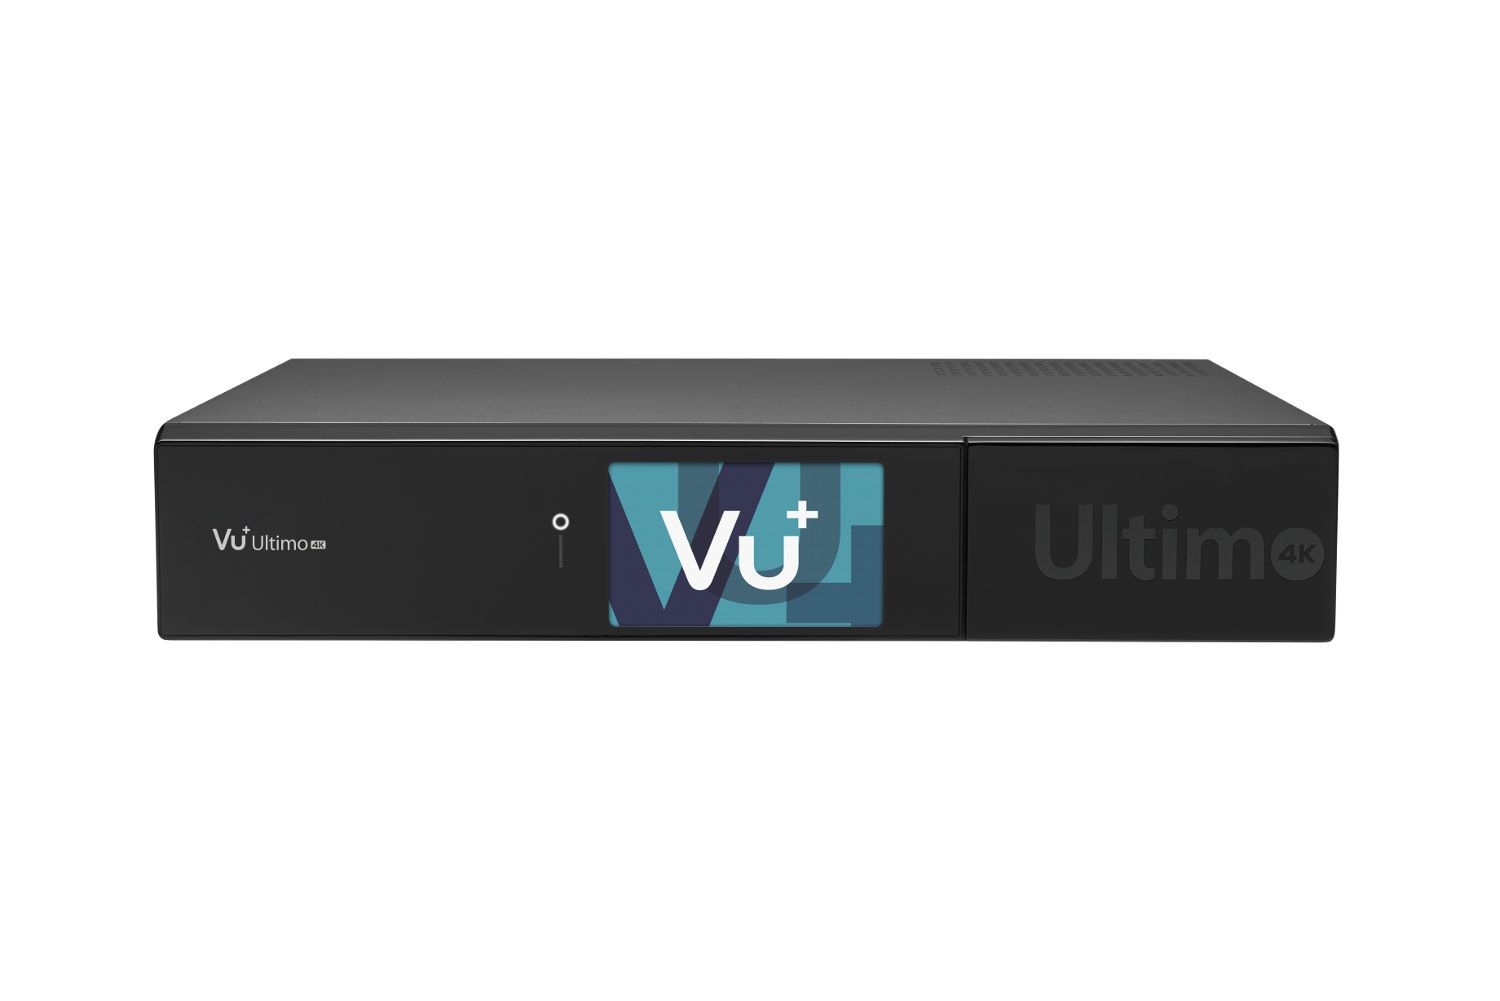 VU+ Ultimo 4K 1x DVB-S2X FBC Twin / 1x DVB-C FBC / 1x DVB-S2 Dual Tuner 4 TB HDD Linux Receiver UHD